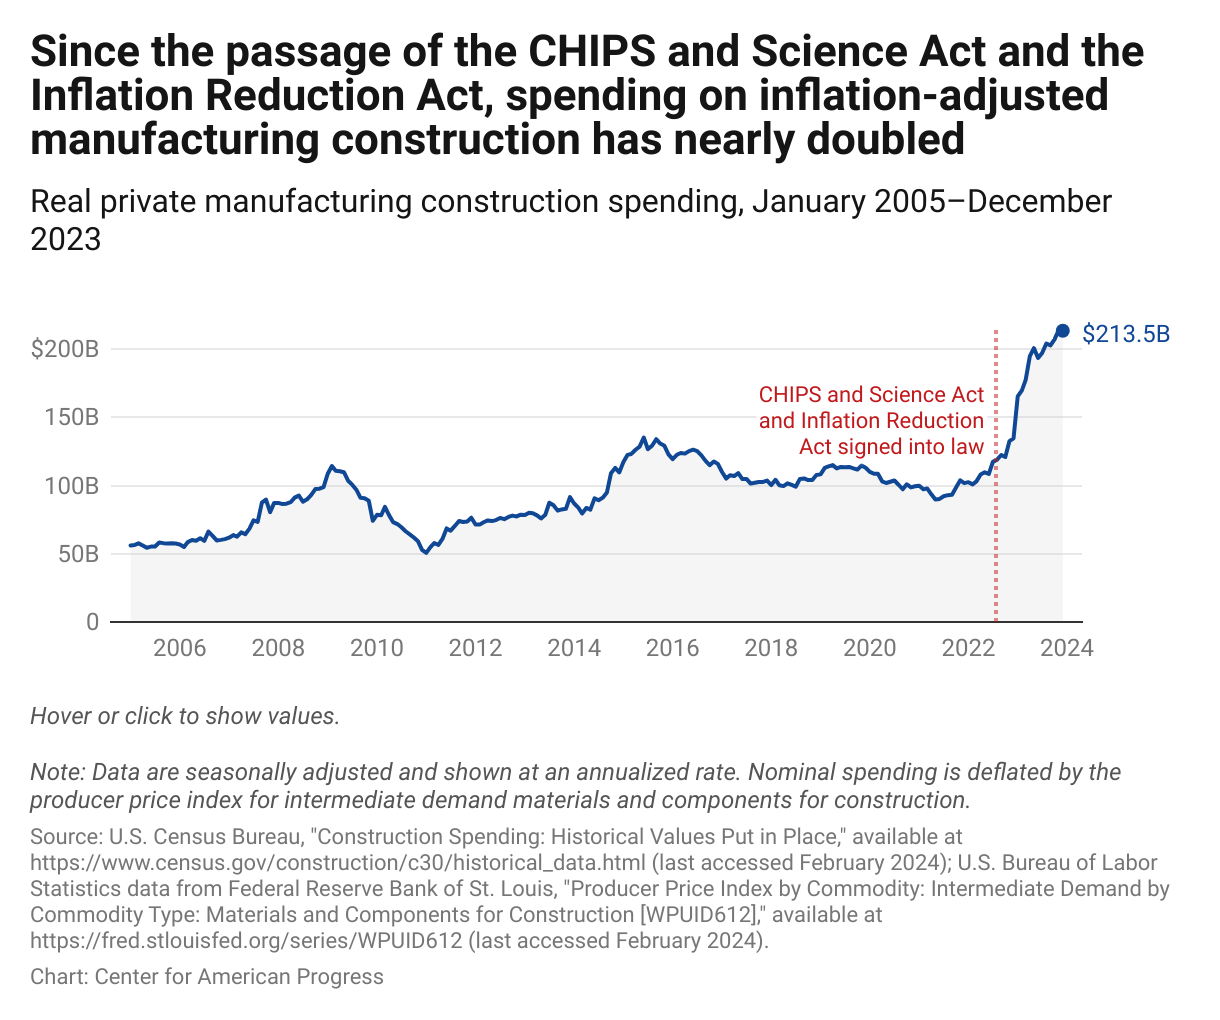 Line graph showing a dramatic increase in private manufacturing construction spending after the signings of the CHIPS and Science Act and the Inflation Reduction Act in August 2022.